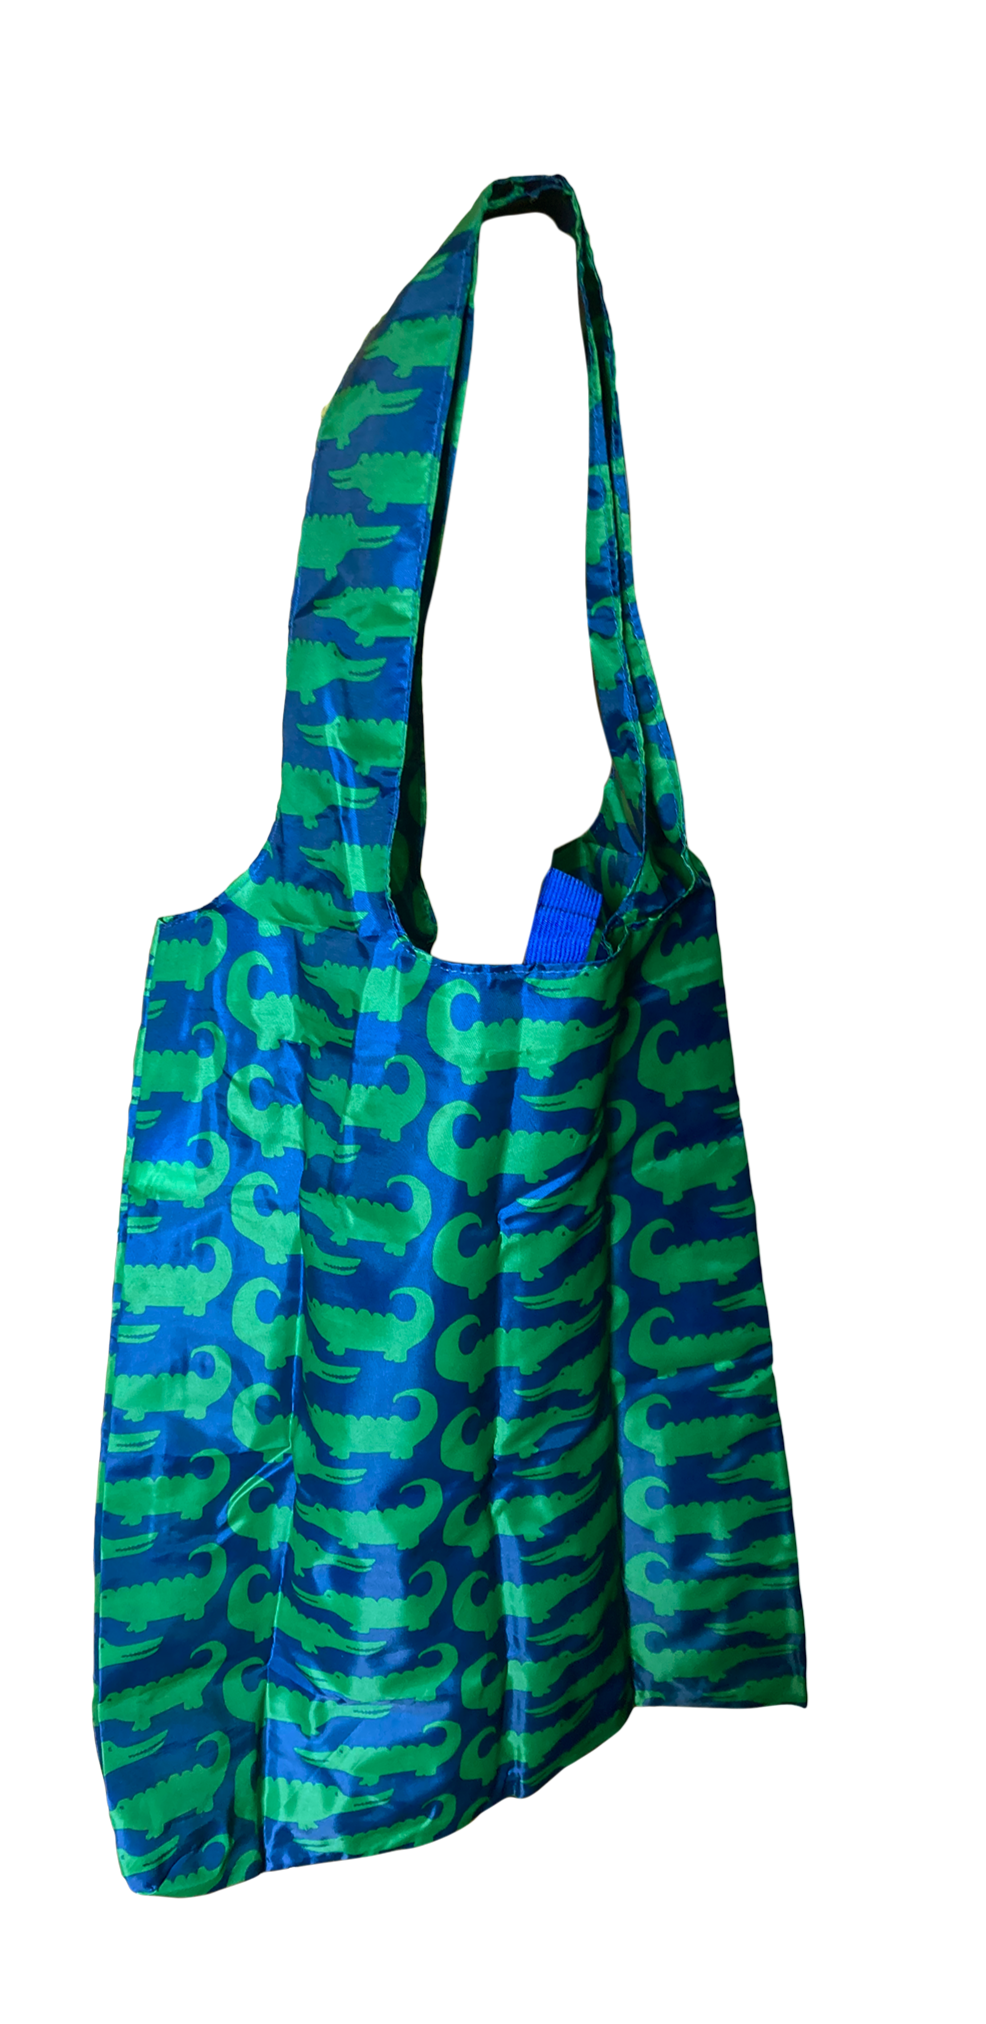 Alligator Reusable Shoppers Tote